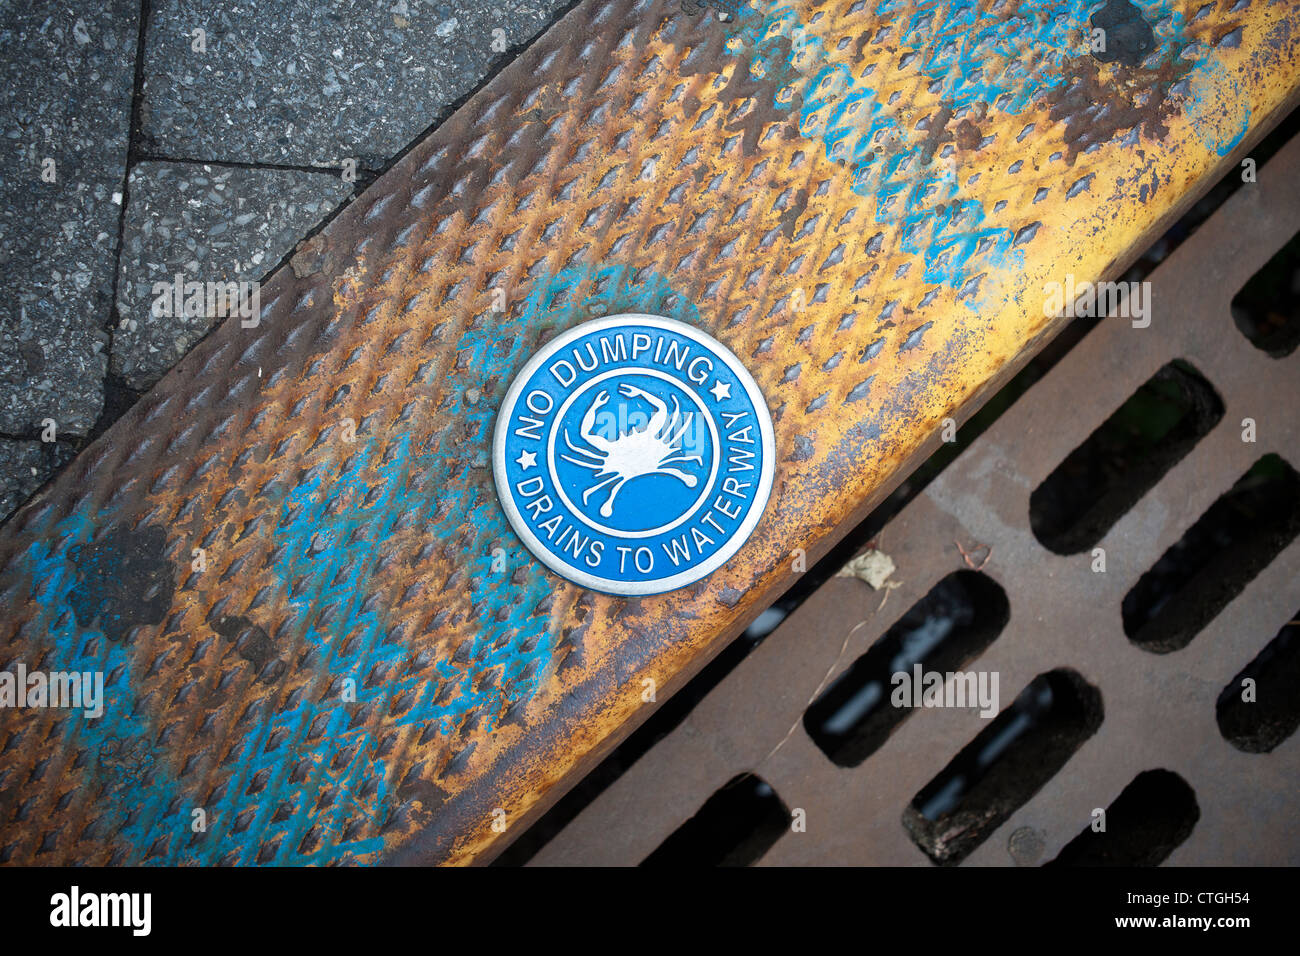 Warning sign on a storm drain in Hoboken, NJ relating to wastewater bypassing treatment and going directly into the waterway. Stock Photo